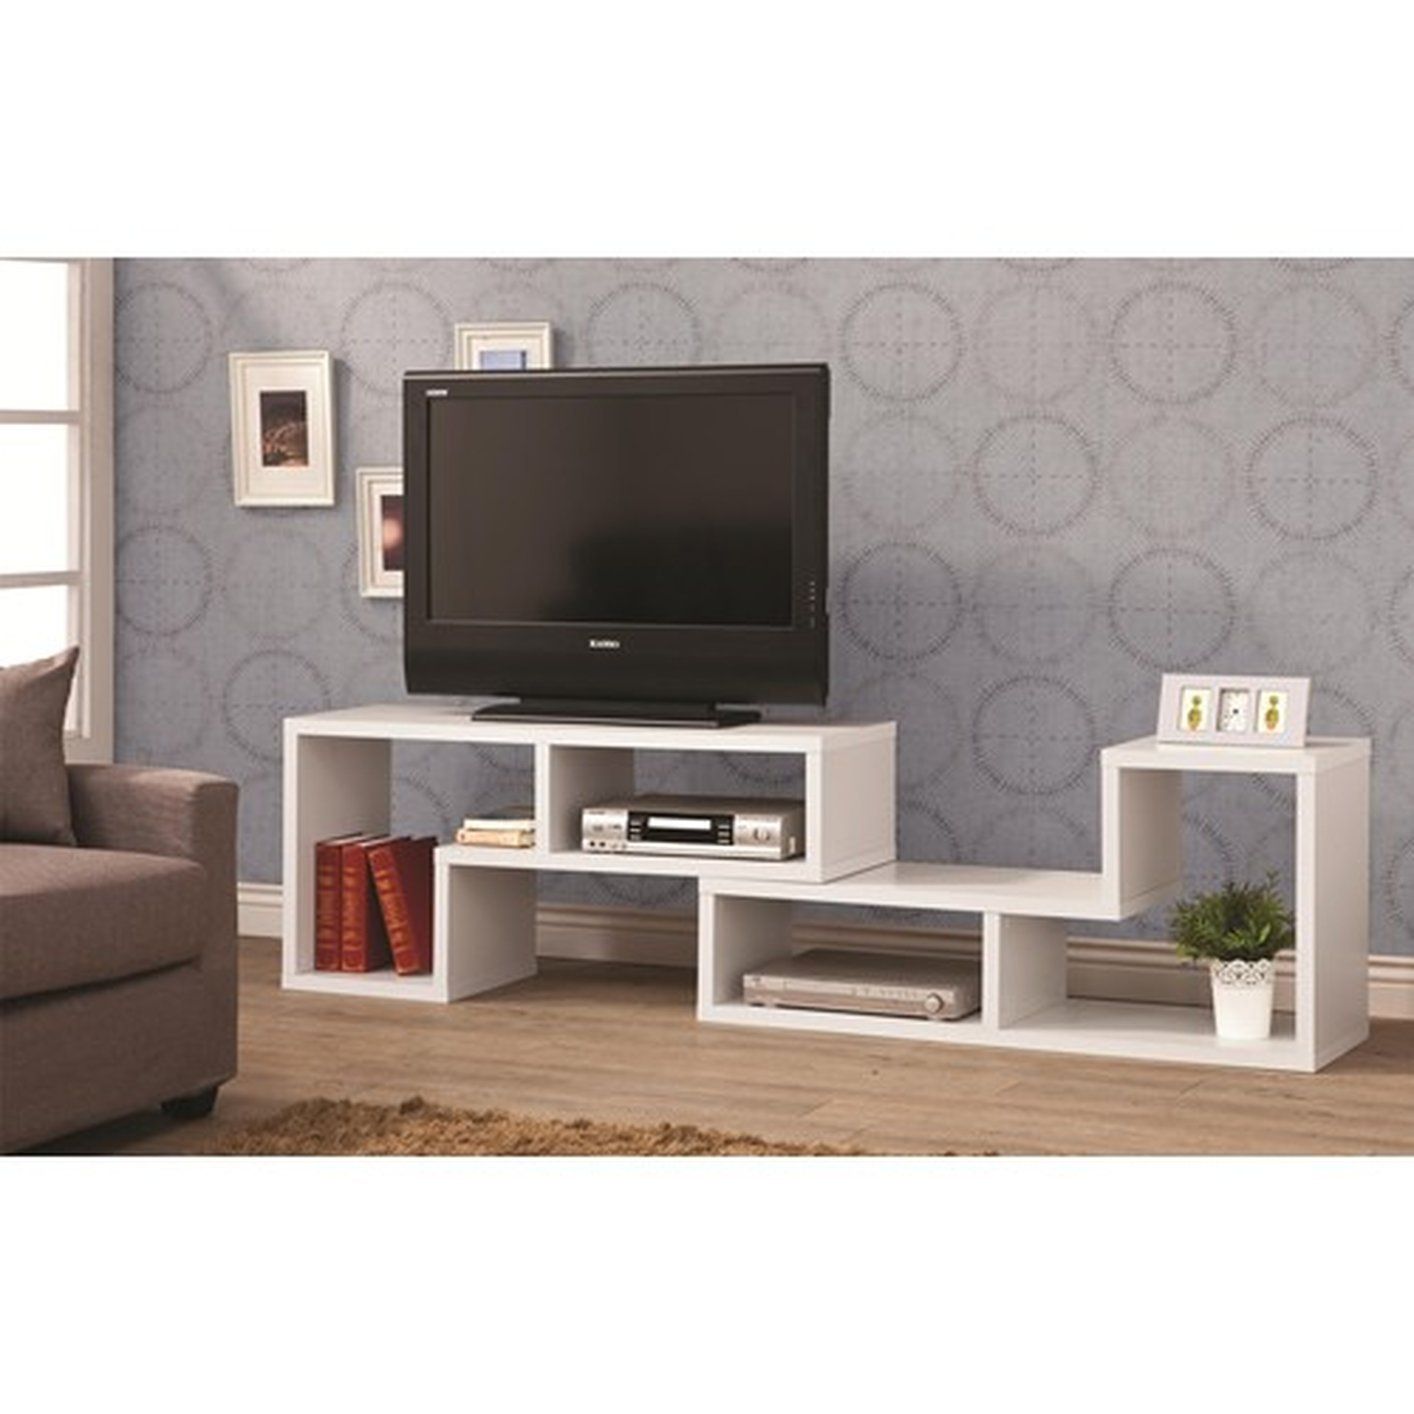 Coaster 800330 White Wood Tv Stand – Steal A Sofa Inside Wood Tv Floor Stands (View 15 of 15)